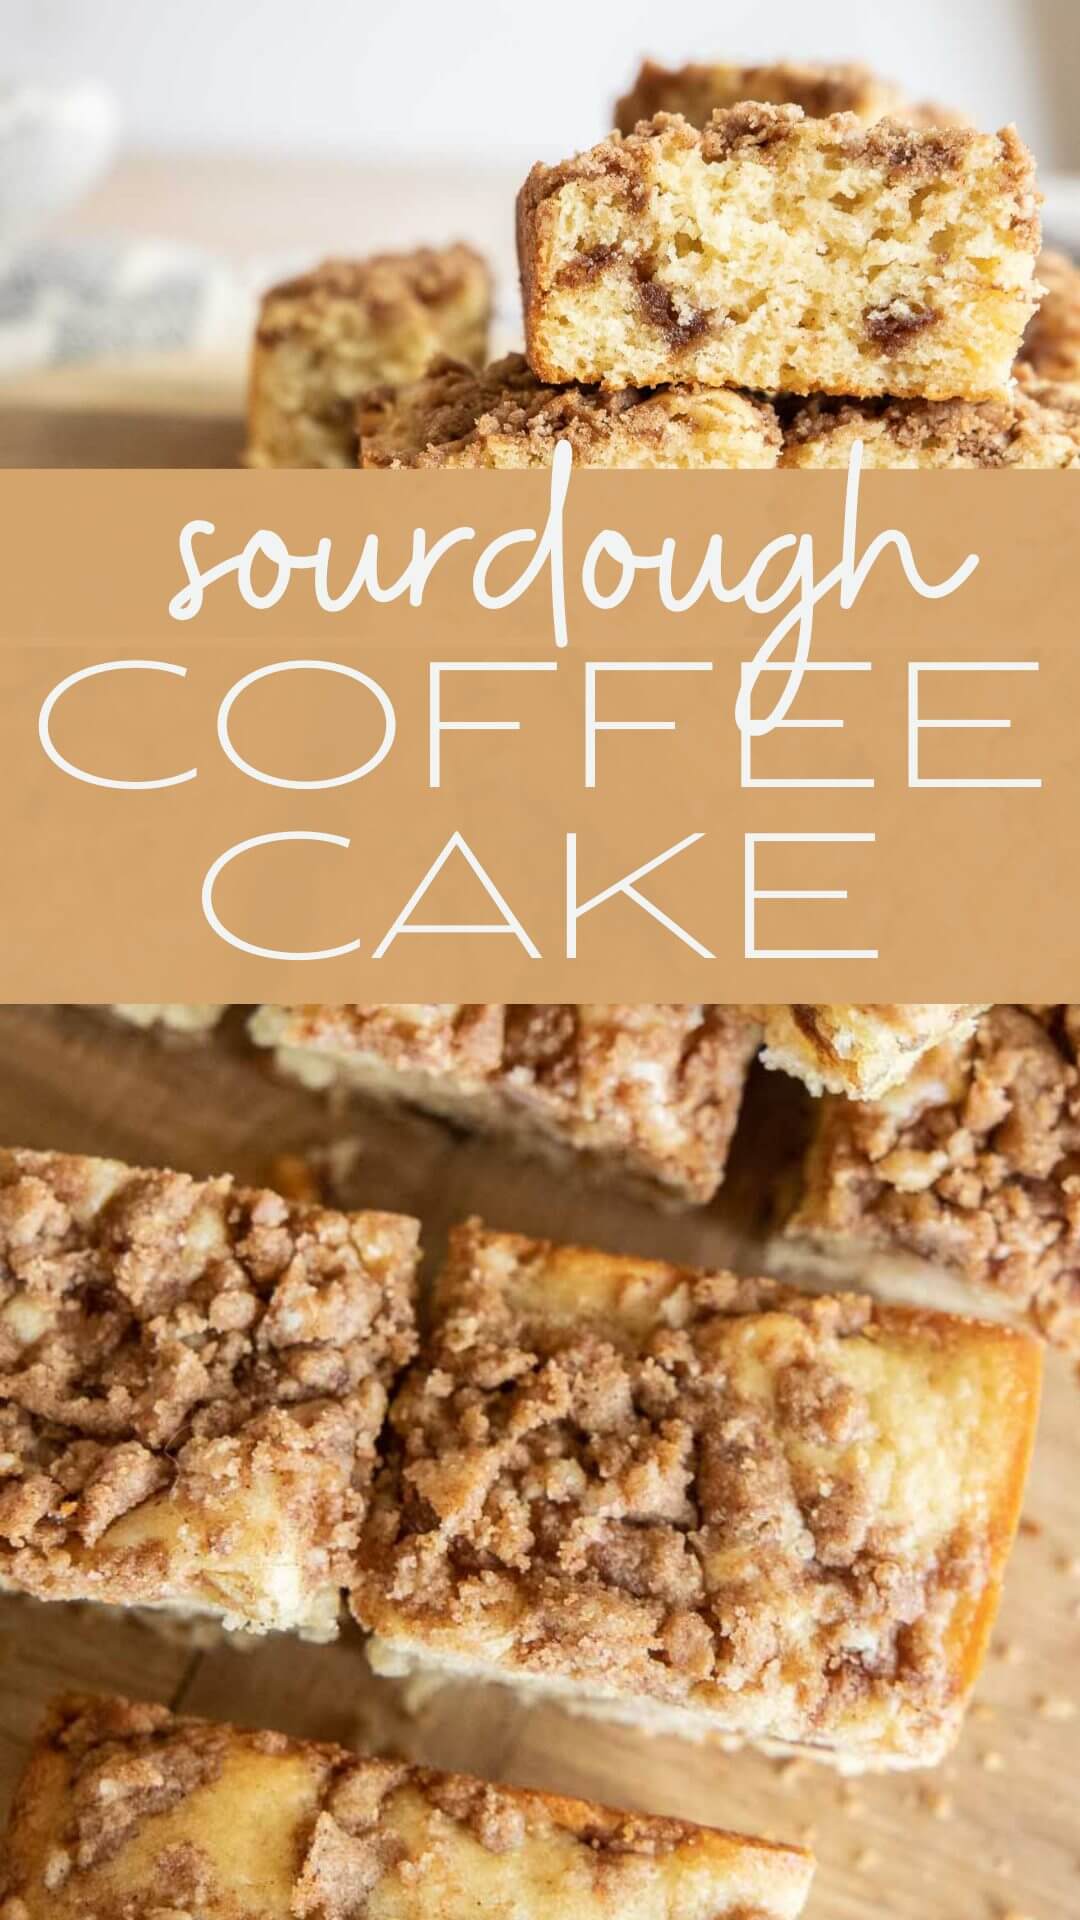 Make this amazing sourdough coffee cake using sourdough discard. The sweet, tender cake with the cinnamon center and streusel topping is it!